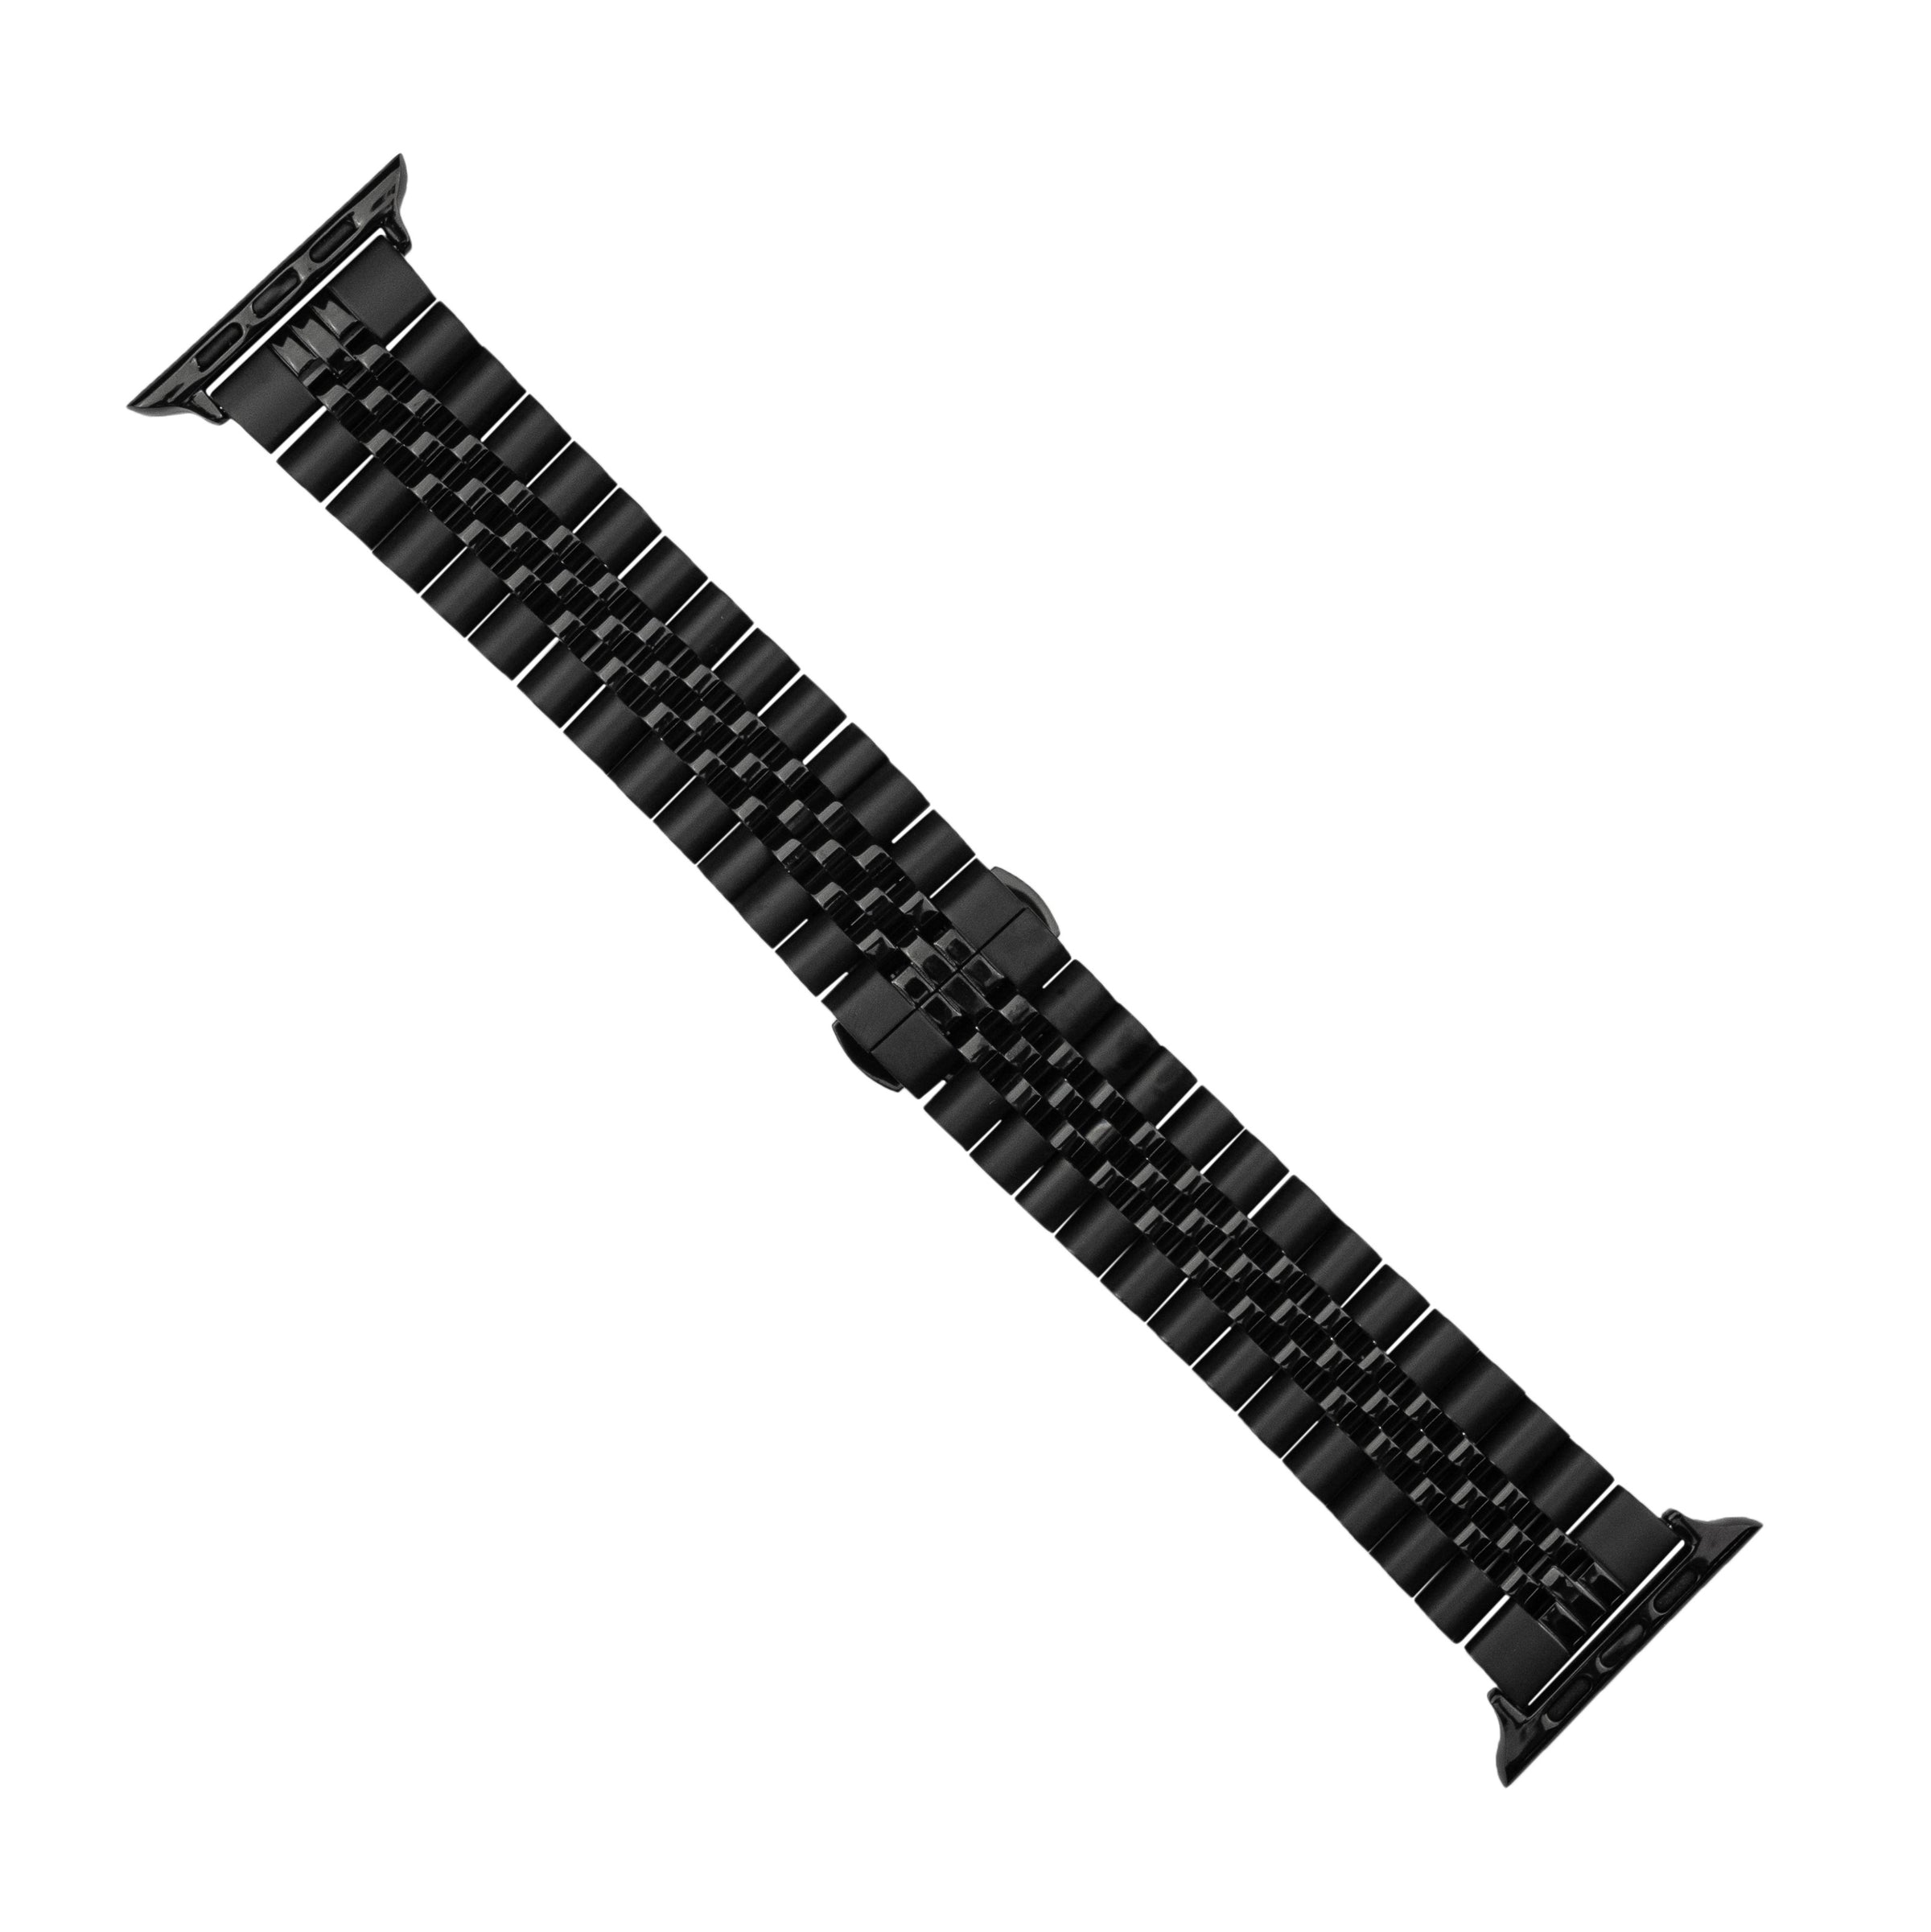 Nomad - Metal Watch Band for Apple Watch 42mm and 44mm - Black